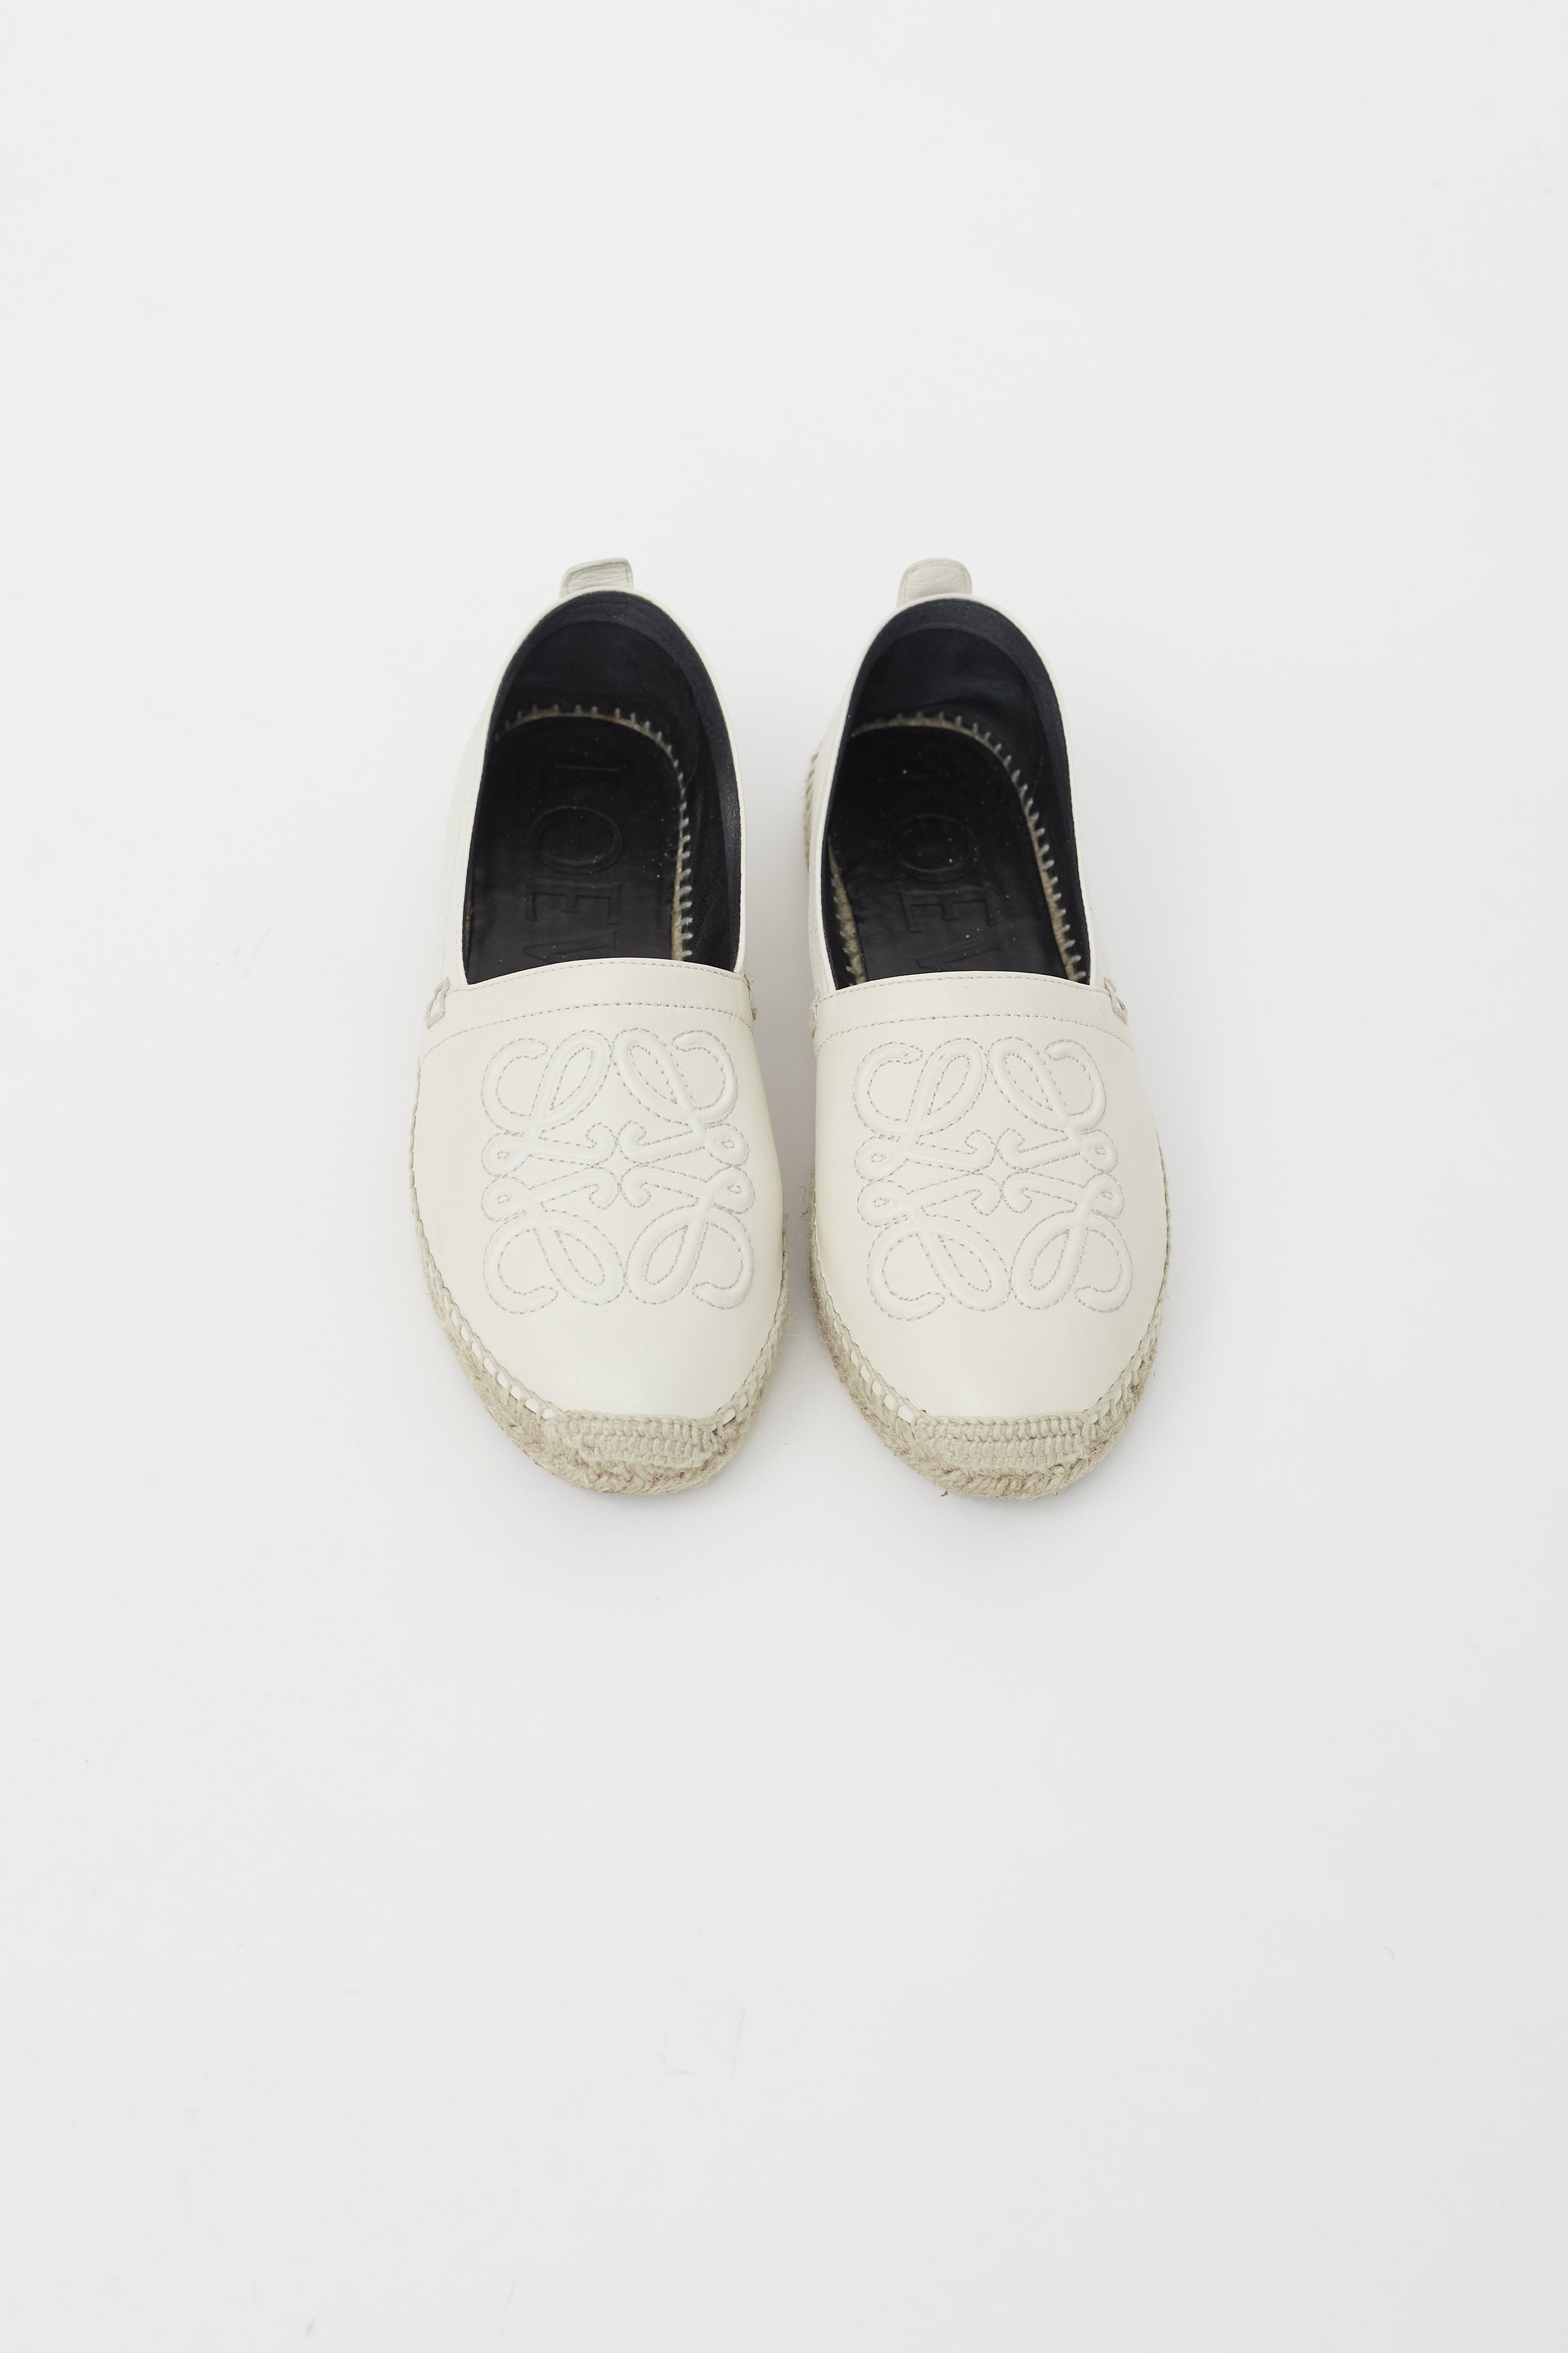 Loewe - Authenticated Espadrille - Leather White Plain for Women, Never Worn, with Tag